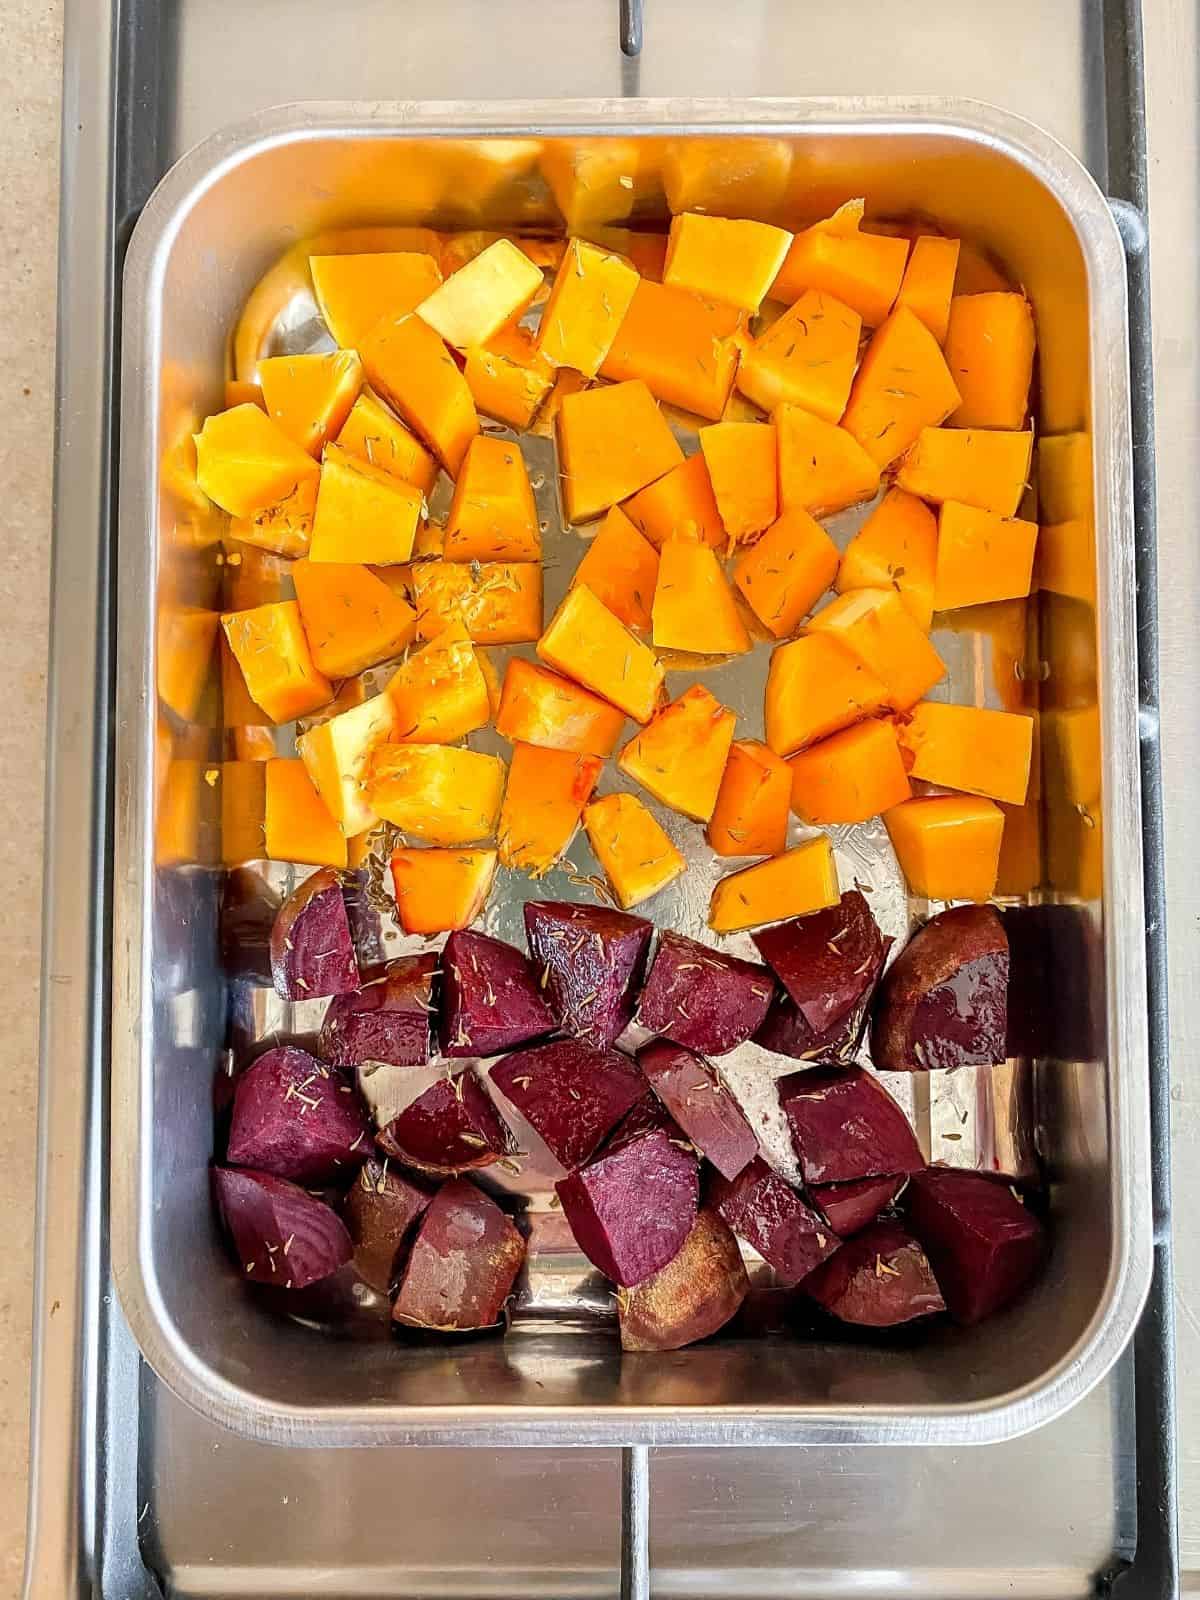 butternut squash and beetroot in a baking tray.